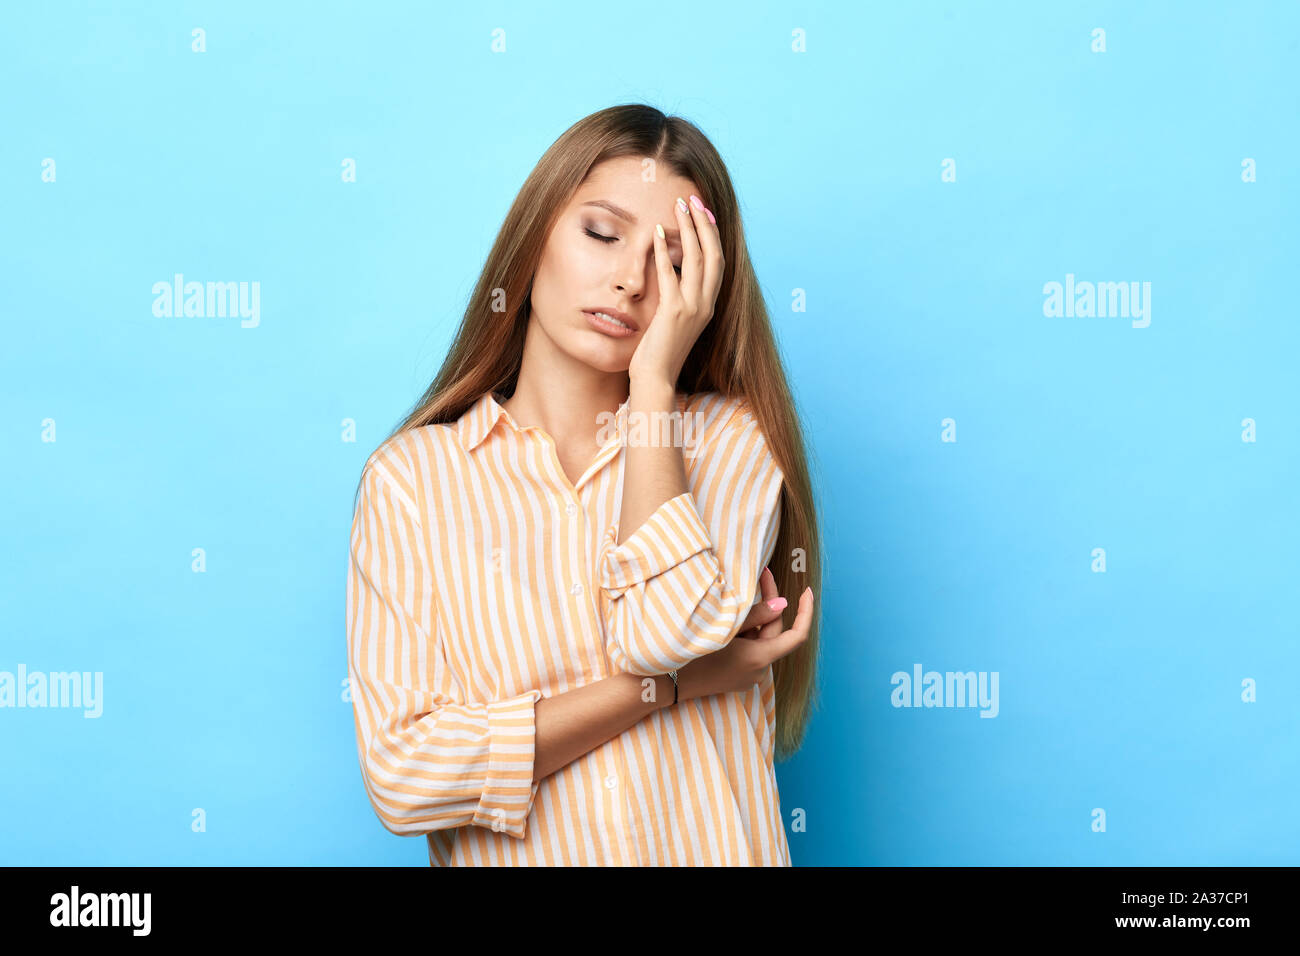 Beautiful exhausted woman feels sleepy, covers face with palm, sighs from tiredness, wears fashion shirt, isolated on blue background. Negative feelin Stock Photo